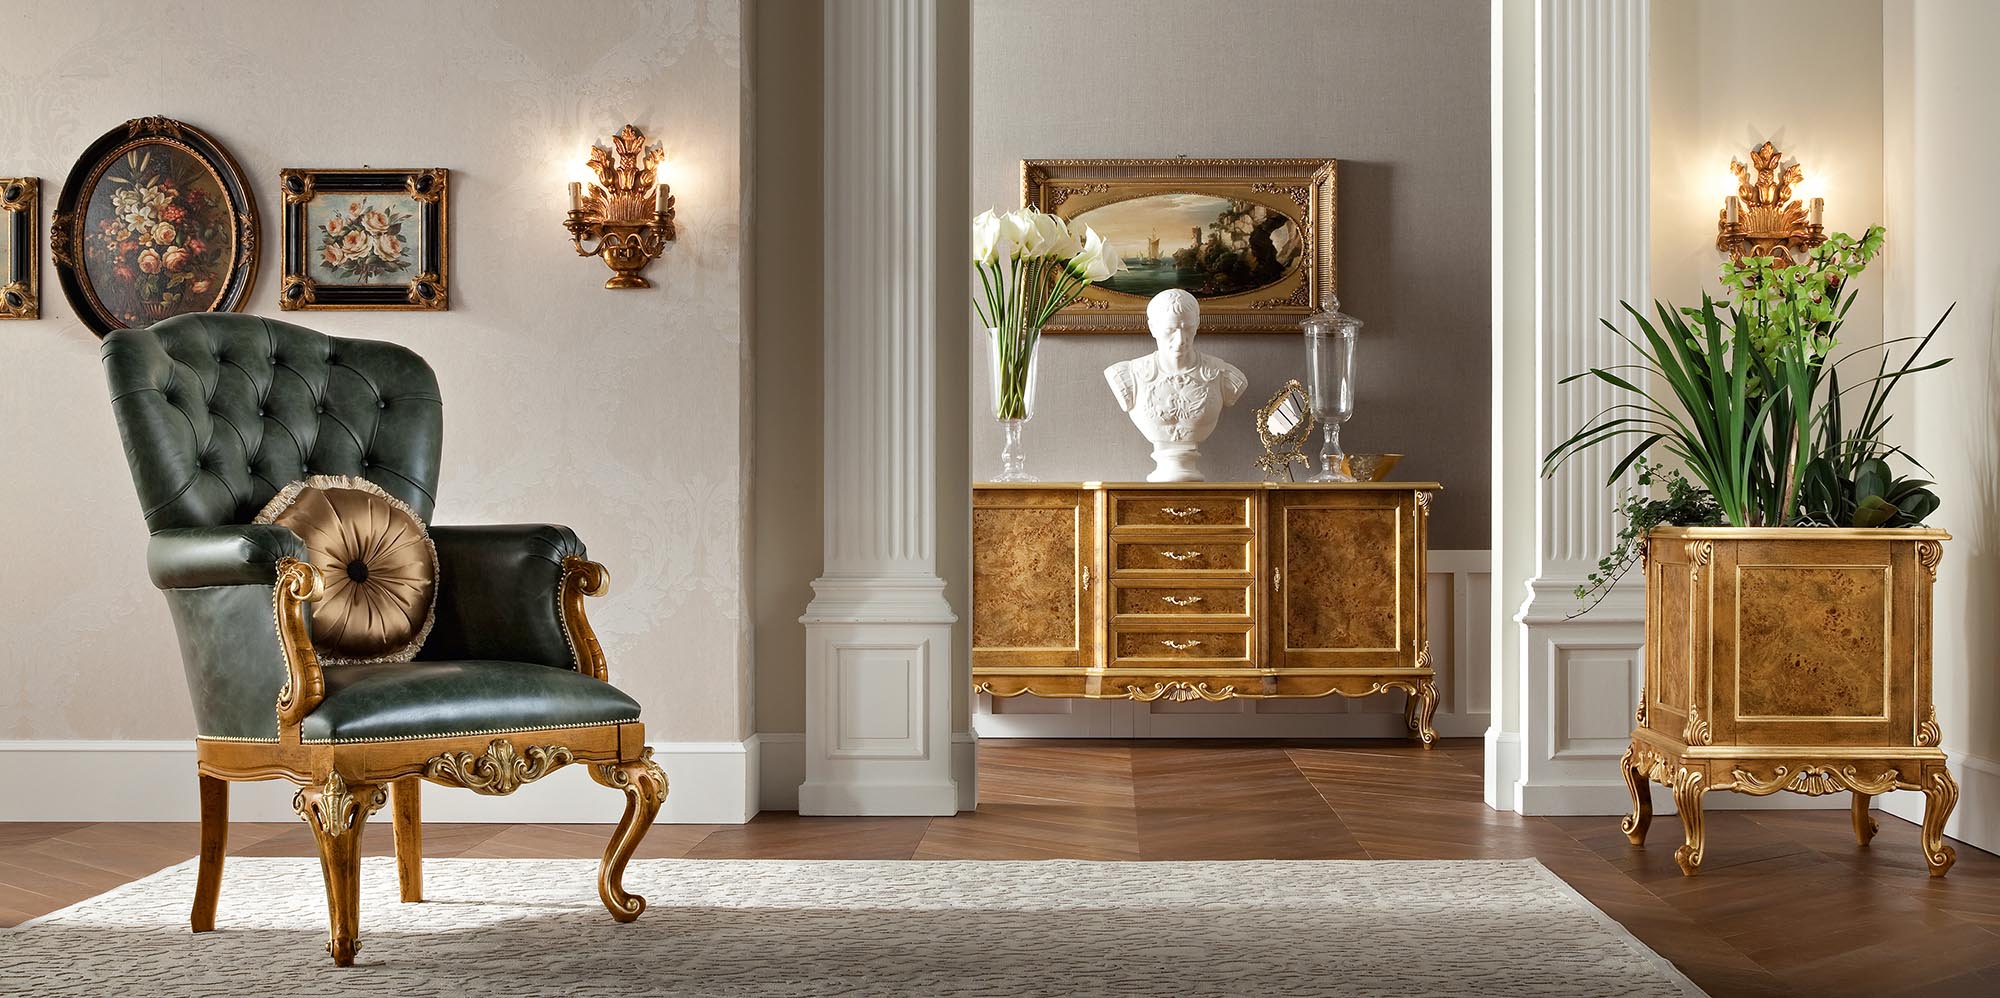 The Richness of Leather Furniture in Classic Interiors